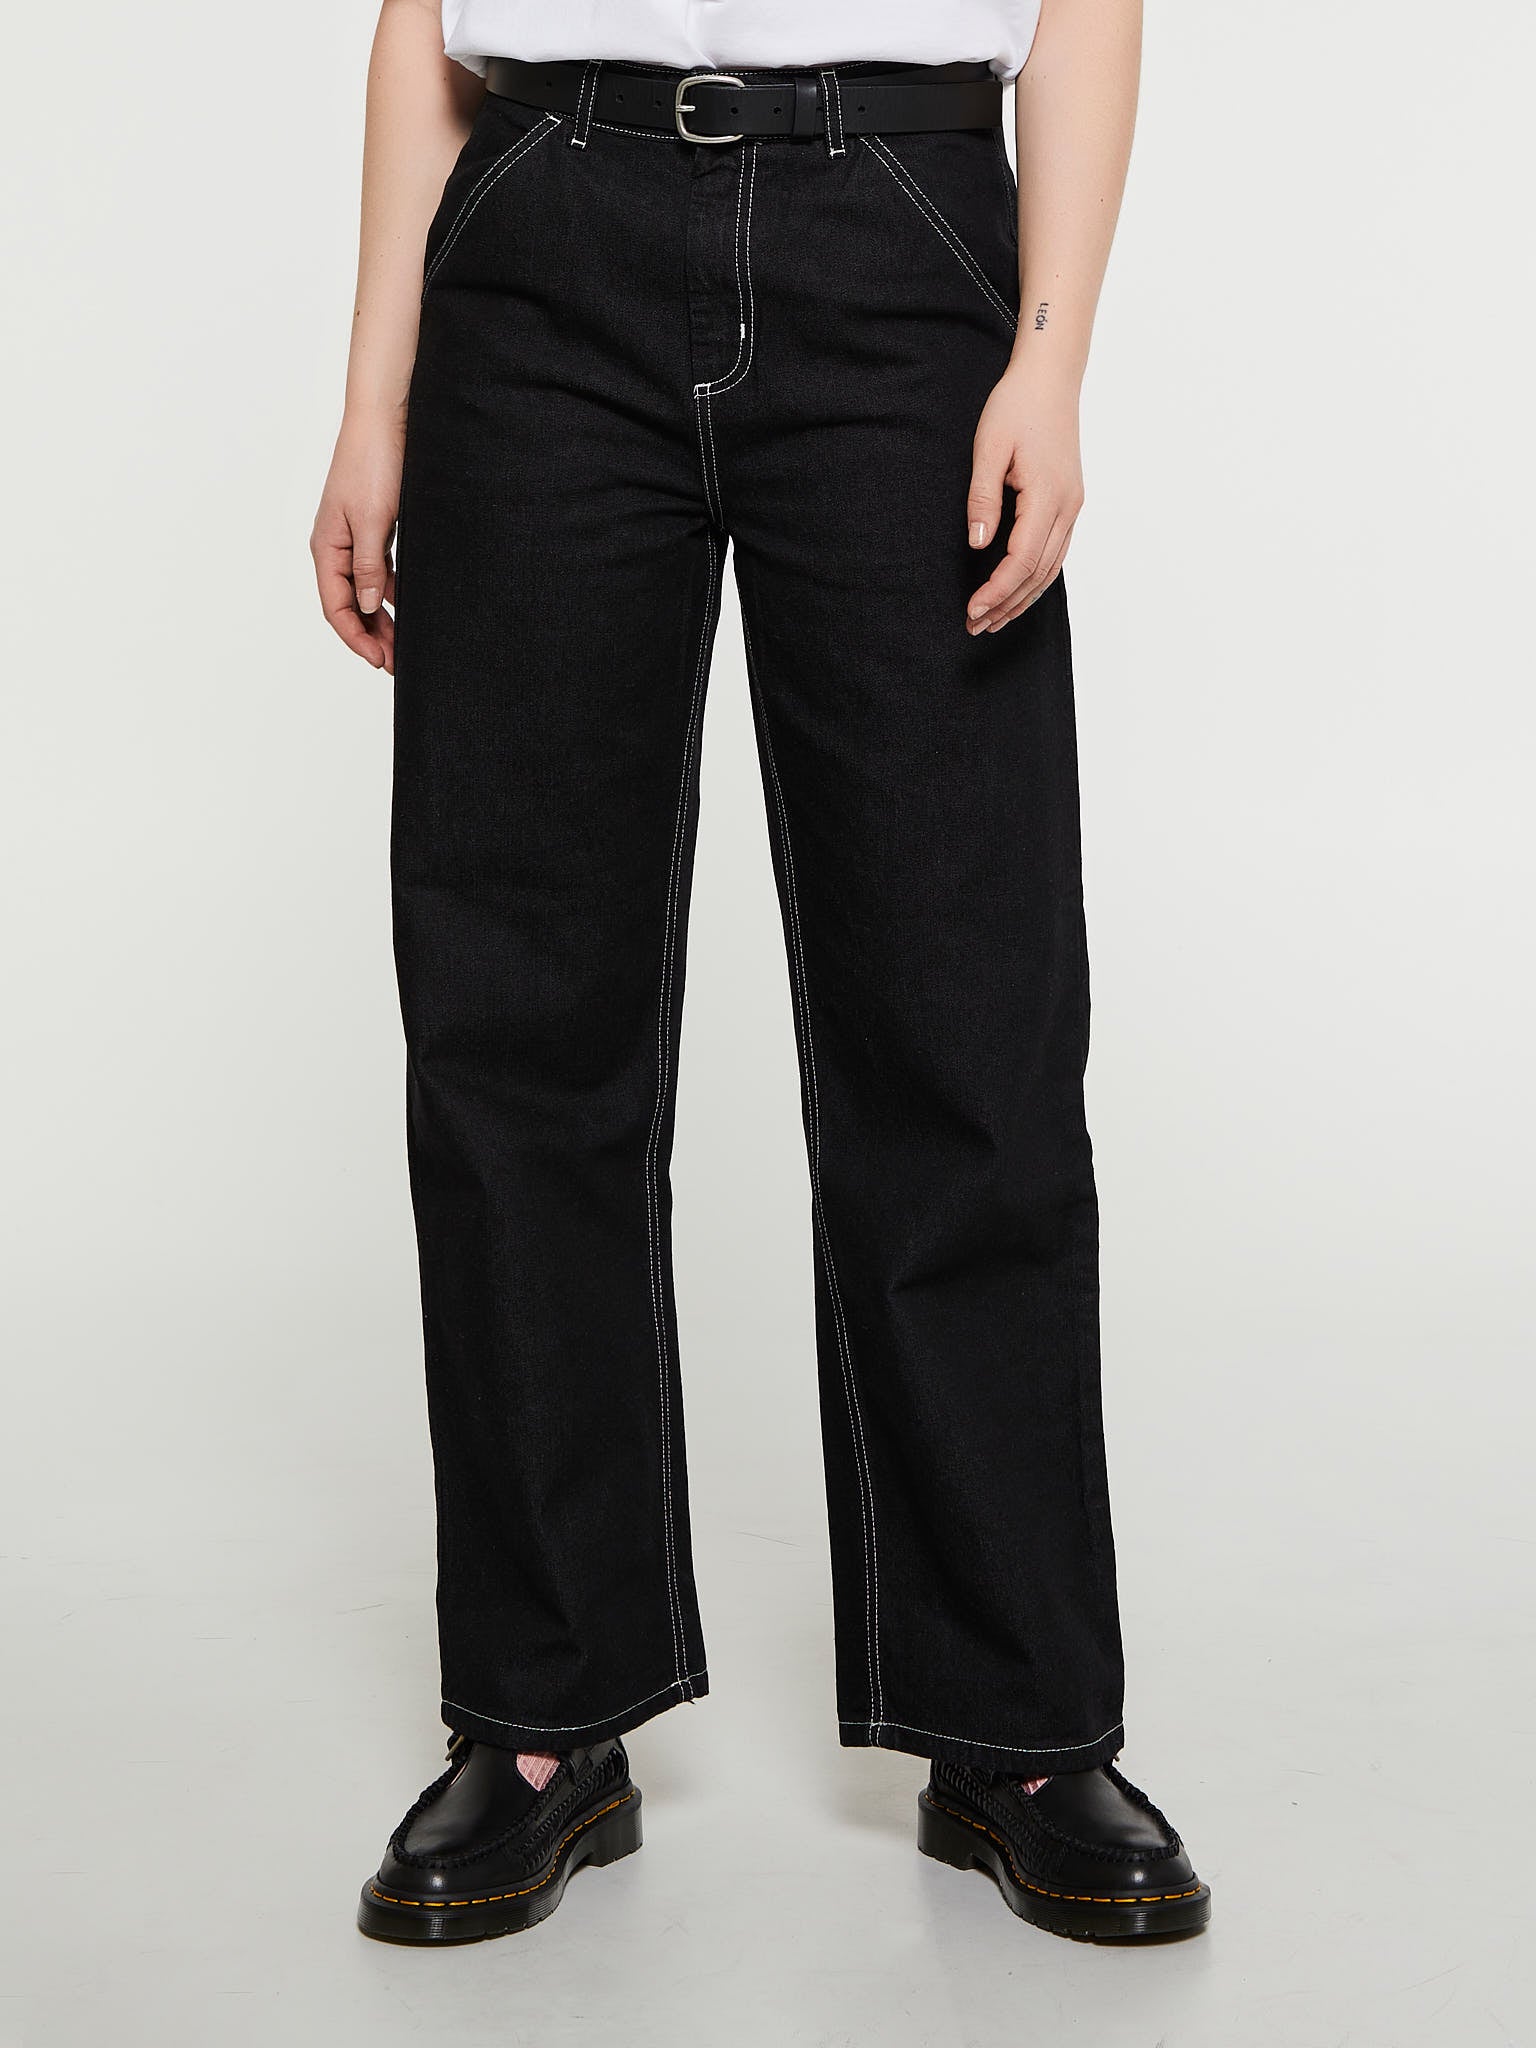 Women's Simple Pant in Black One Wash